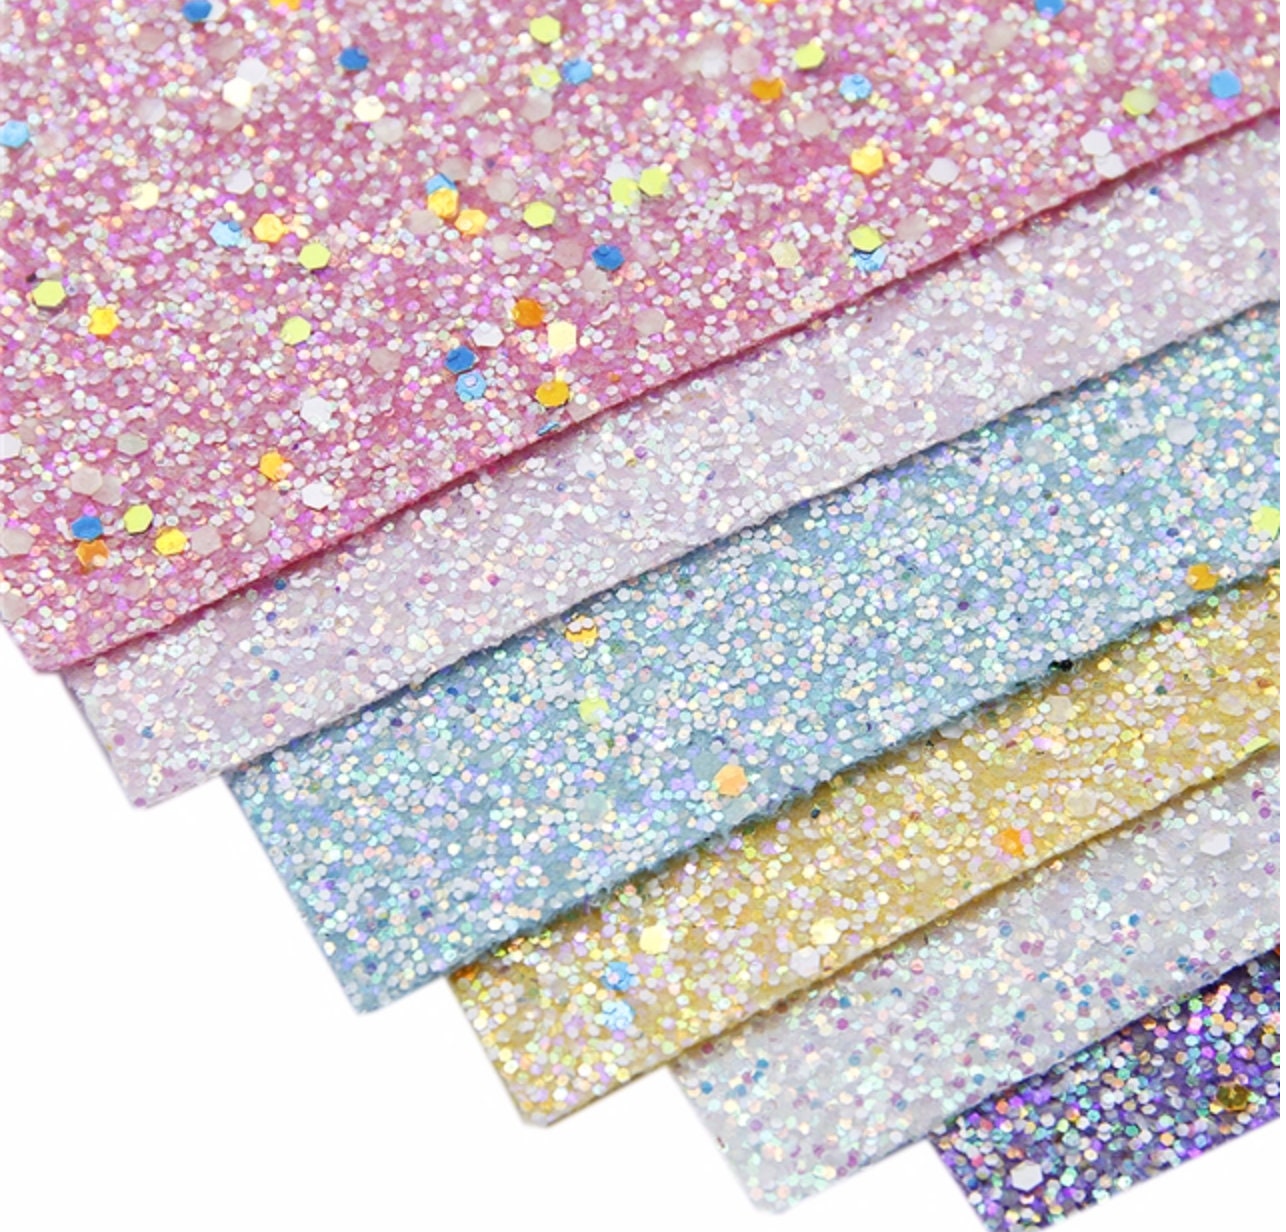 Glow in the Dark Chunky Glitter faux leather sheets great for baby bows, ear rings, girl bows, accessories, colorful, shiny TheFabricDude